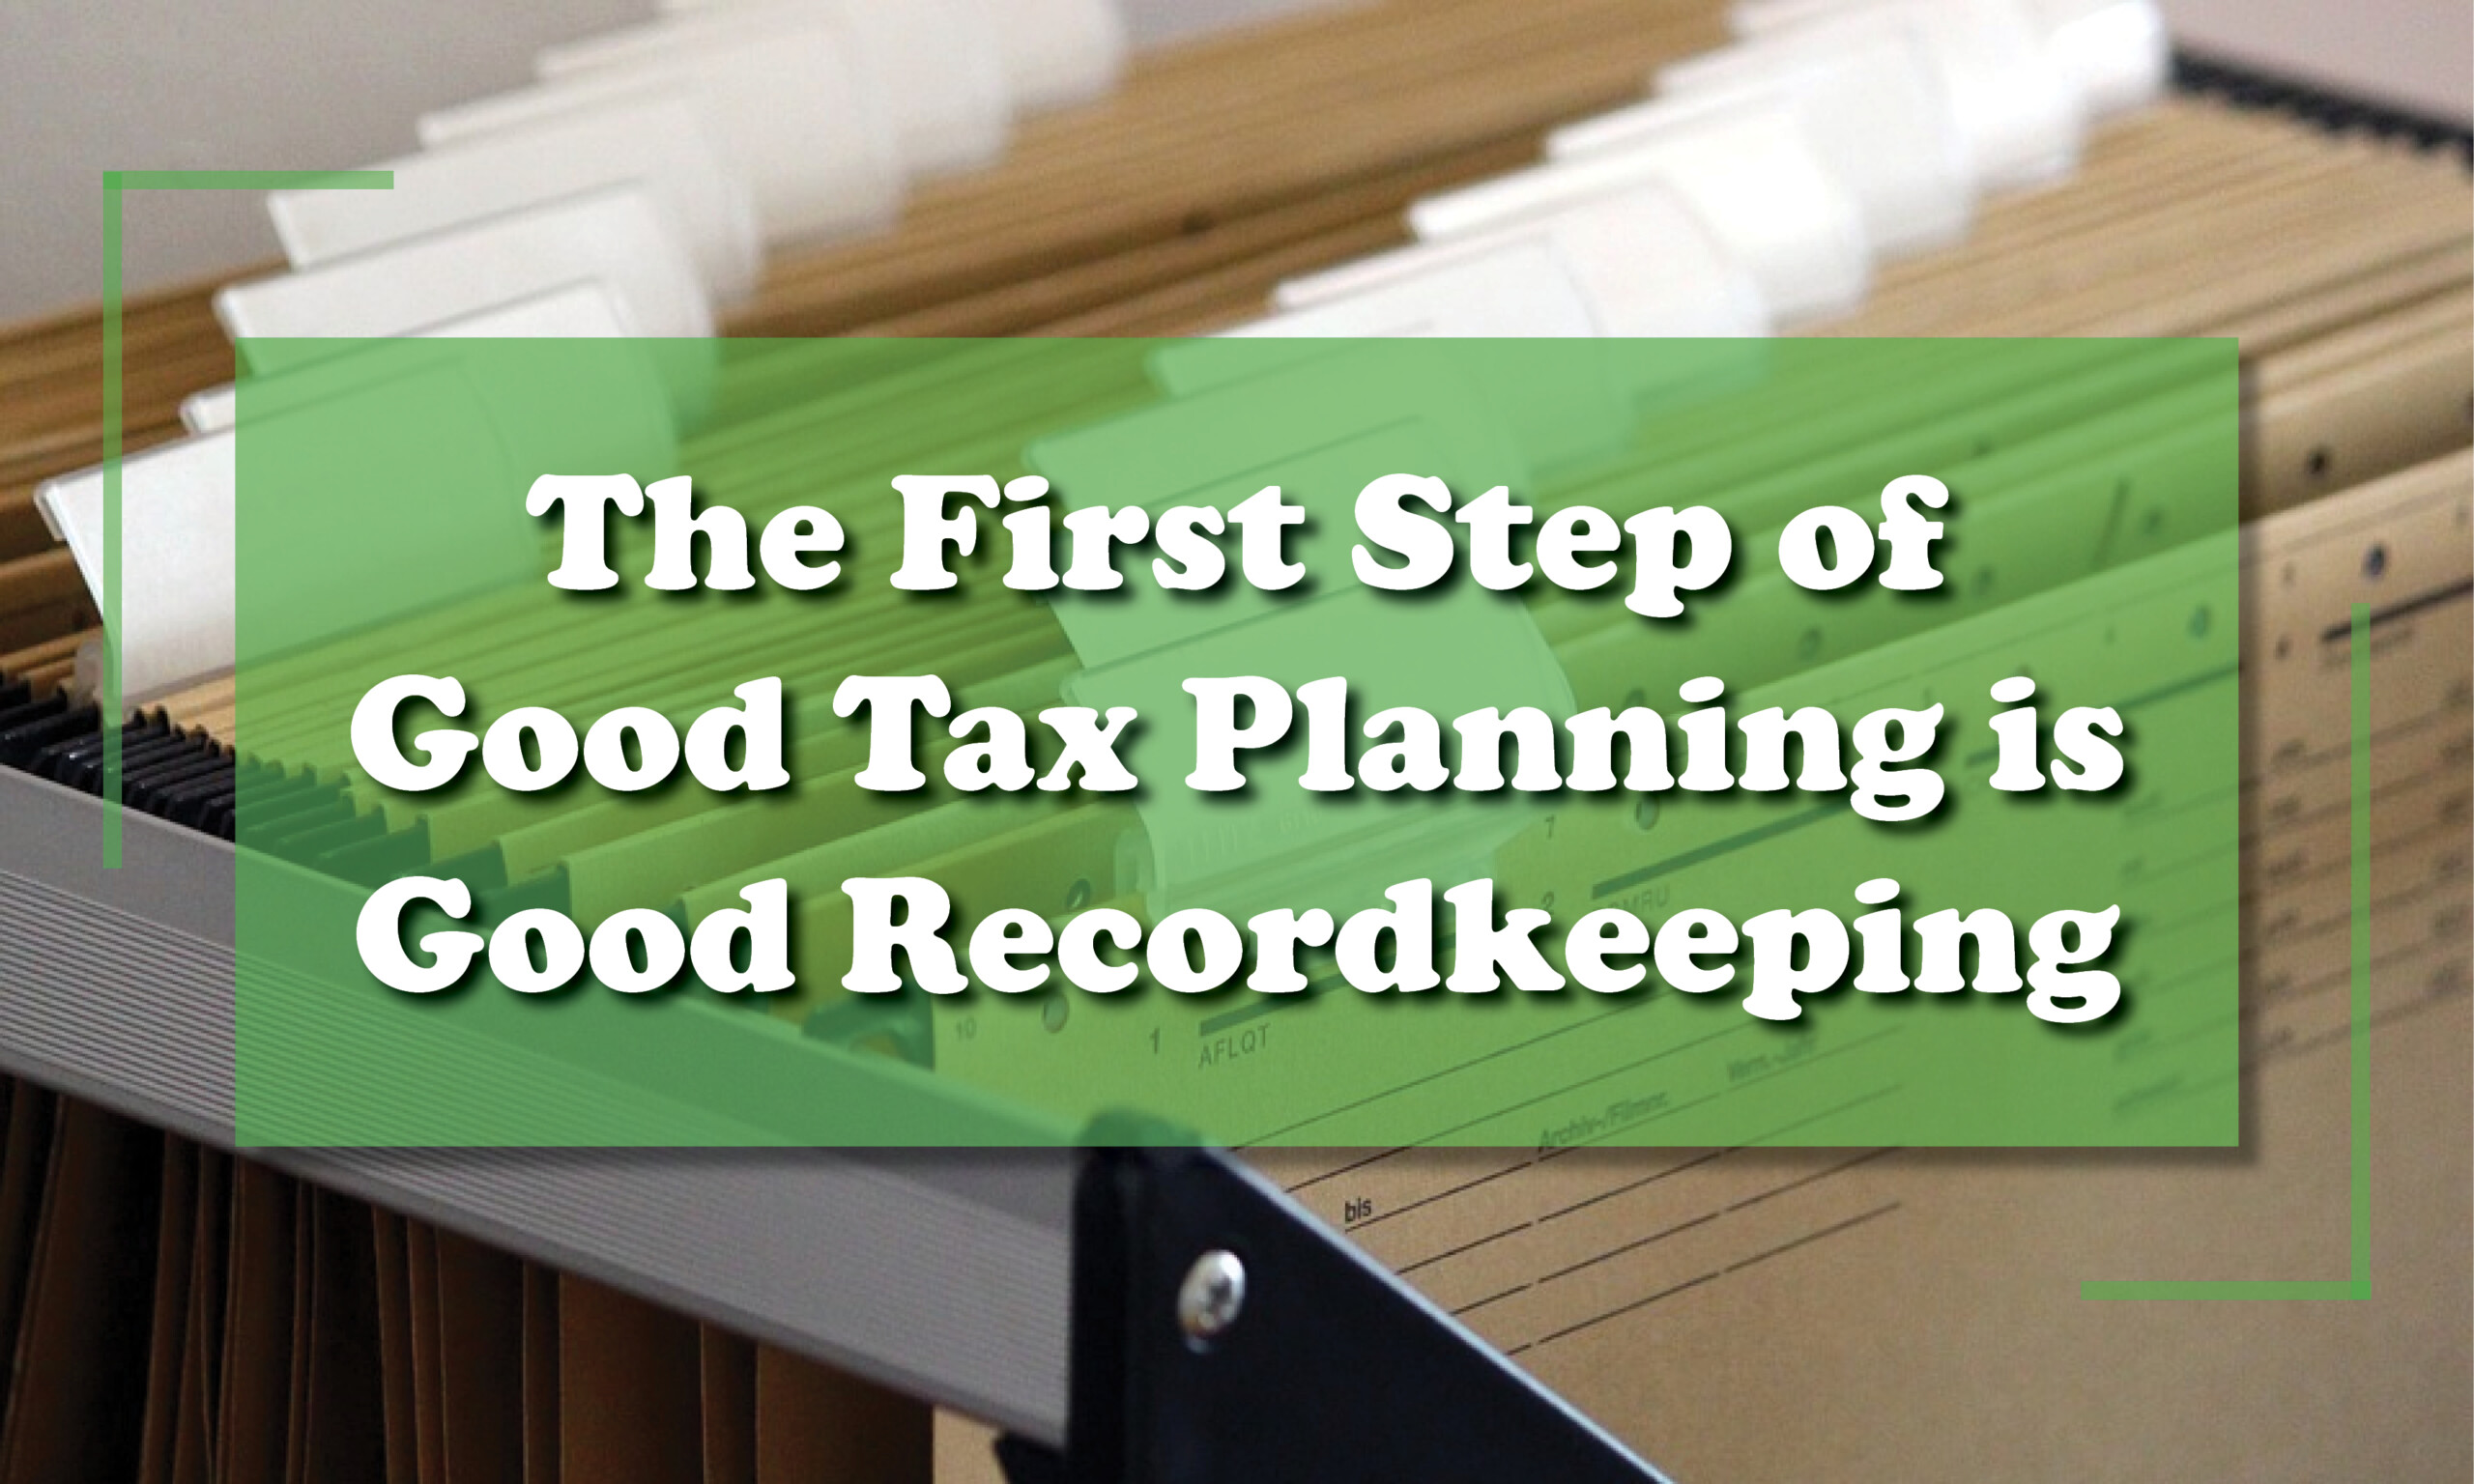 The first step of good tax planning is good recordkeeping